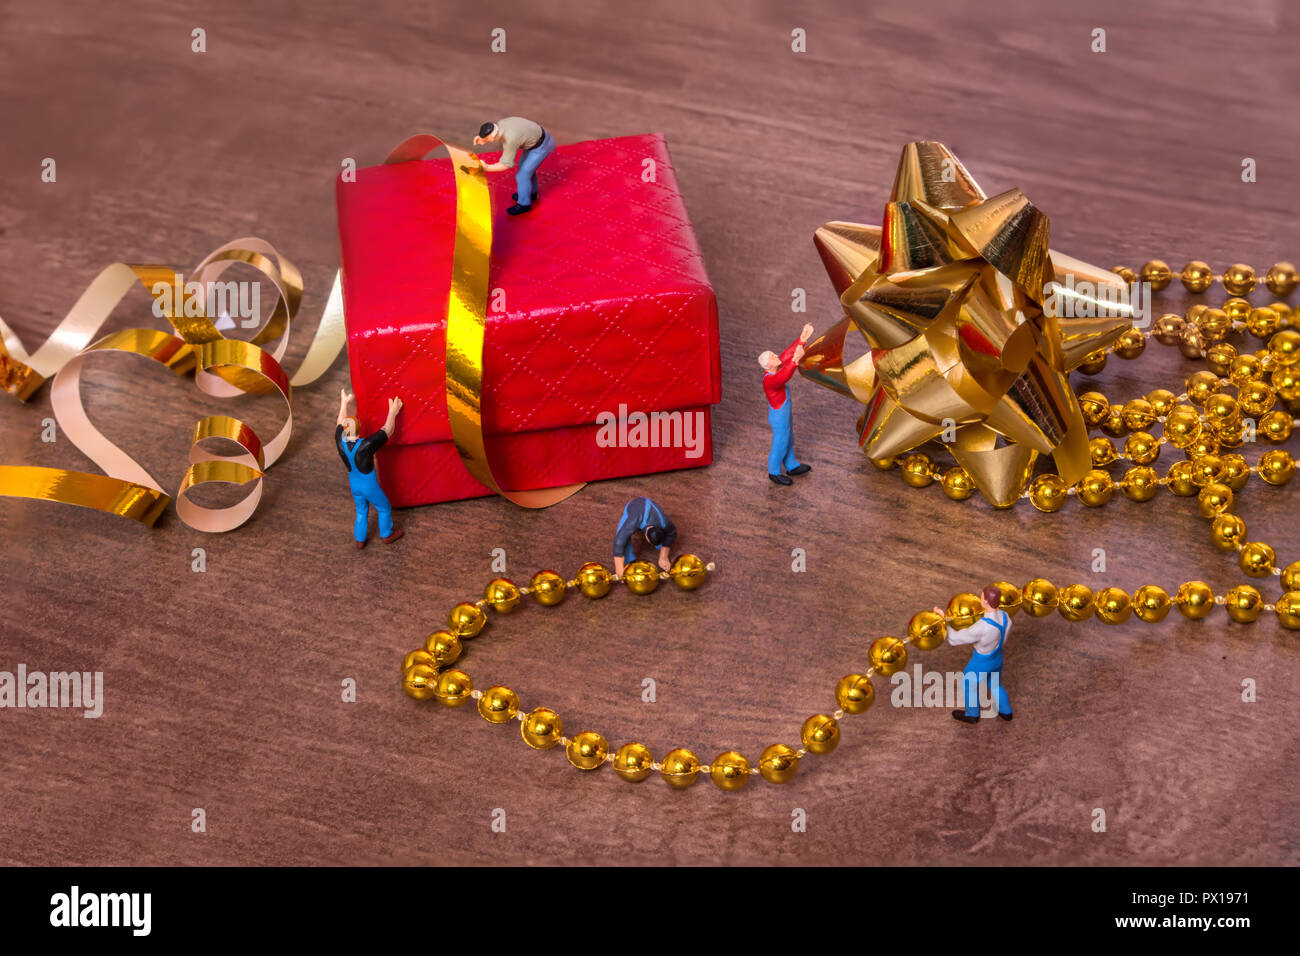 Creative concept with miniature people and a gift box on a wooden background. The process of packing gifts. Gold ribbon, bow, festive beads. Stock Photo